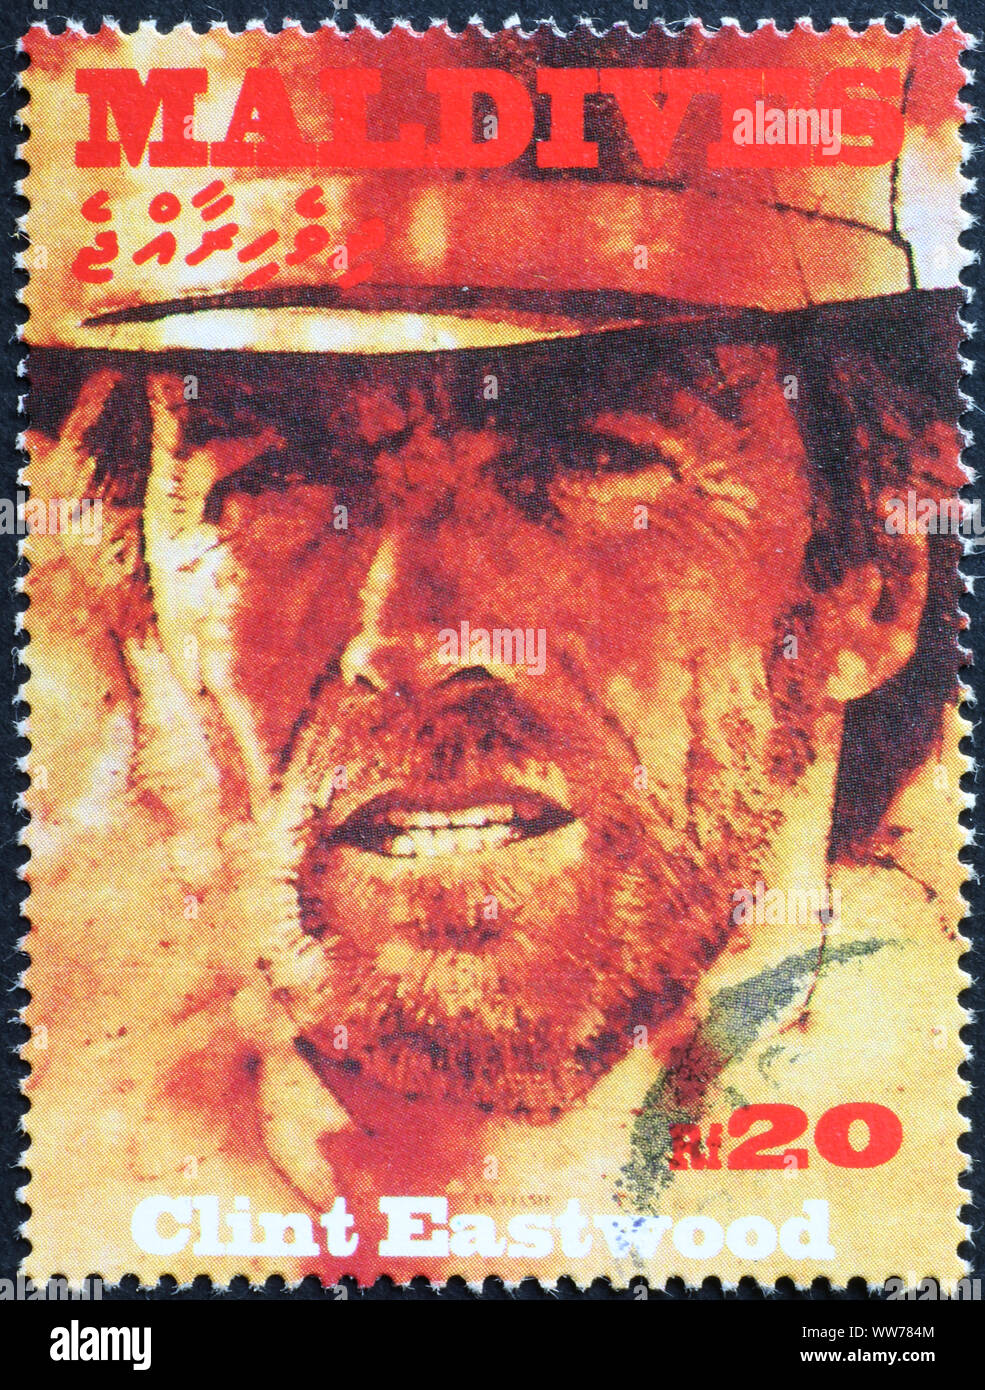 Closeup of young Clint Eastwood on posage stamp Stock Photo